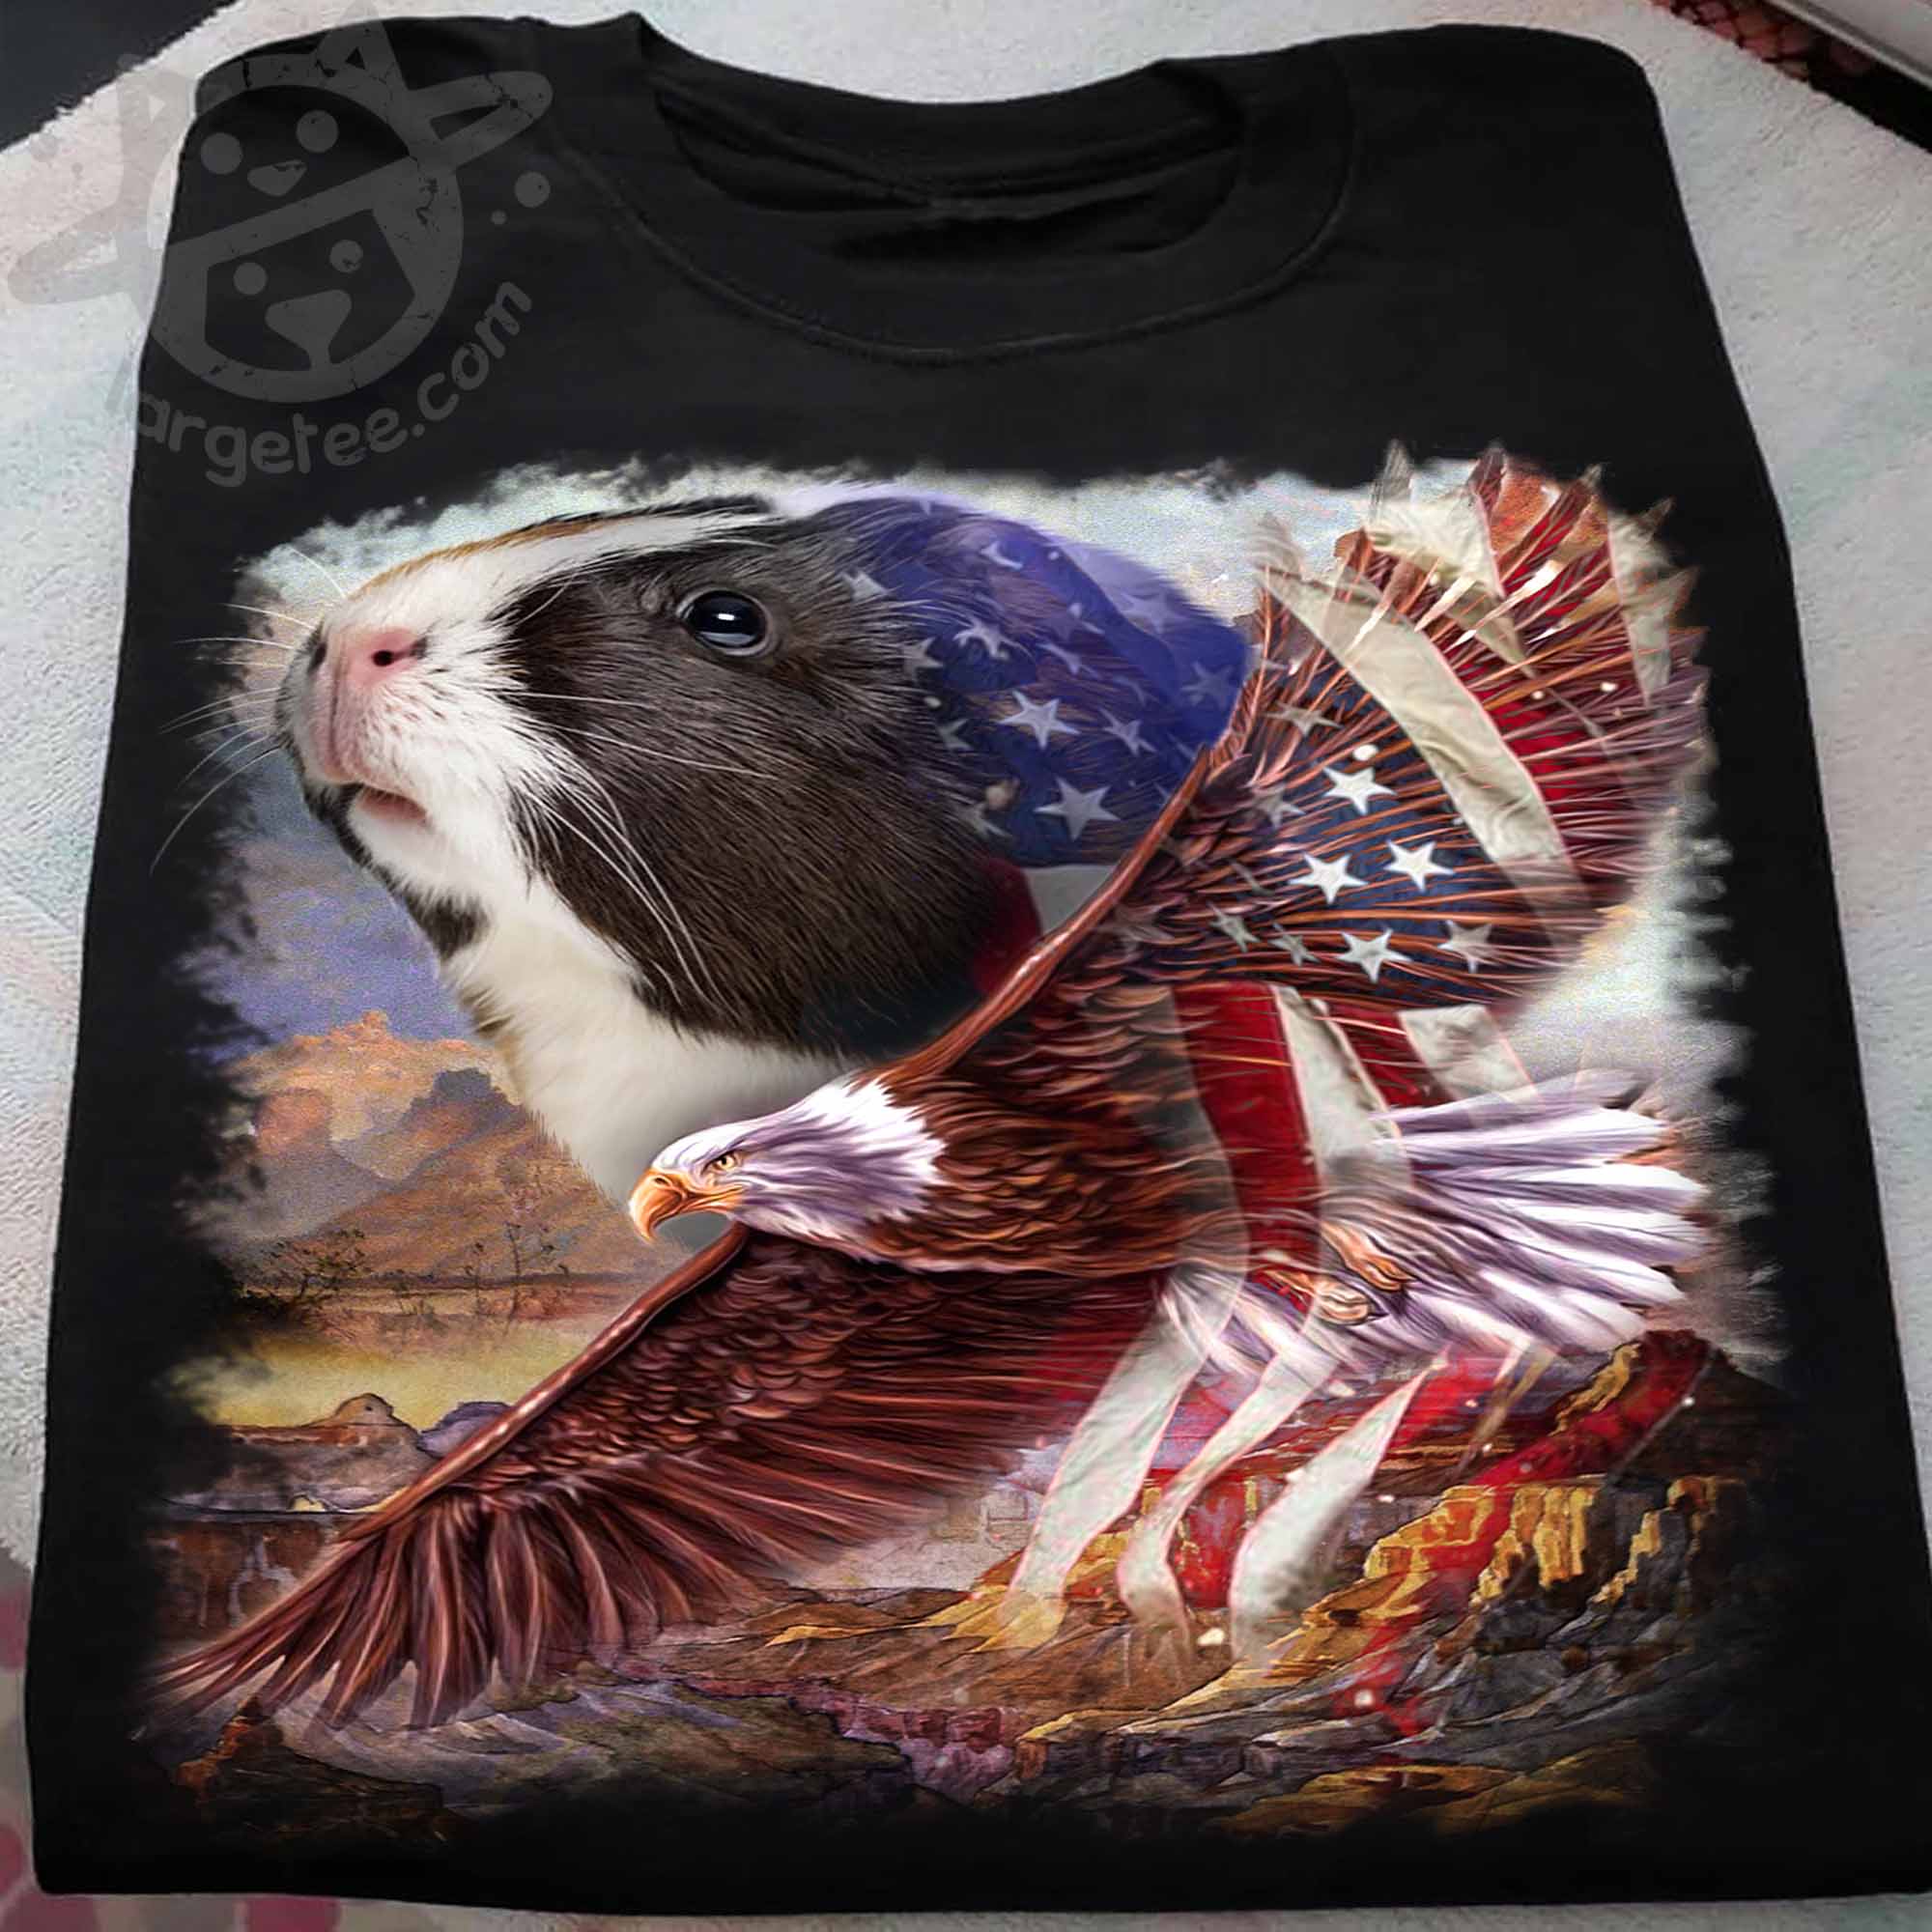 Guinea pig and eagle the symbol of America - America flag, independence day